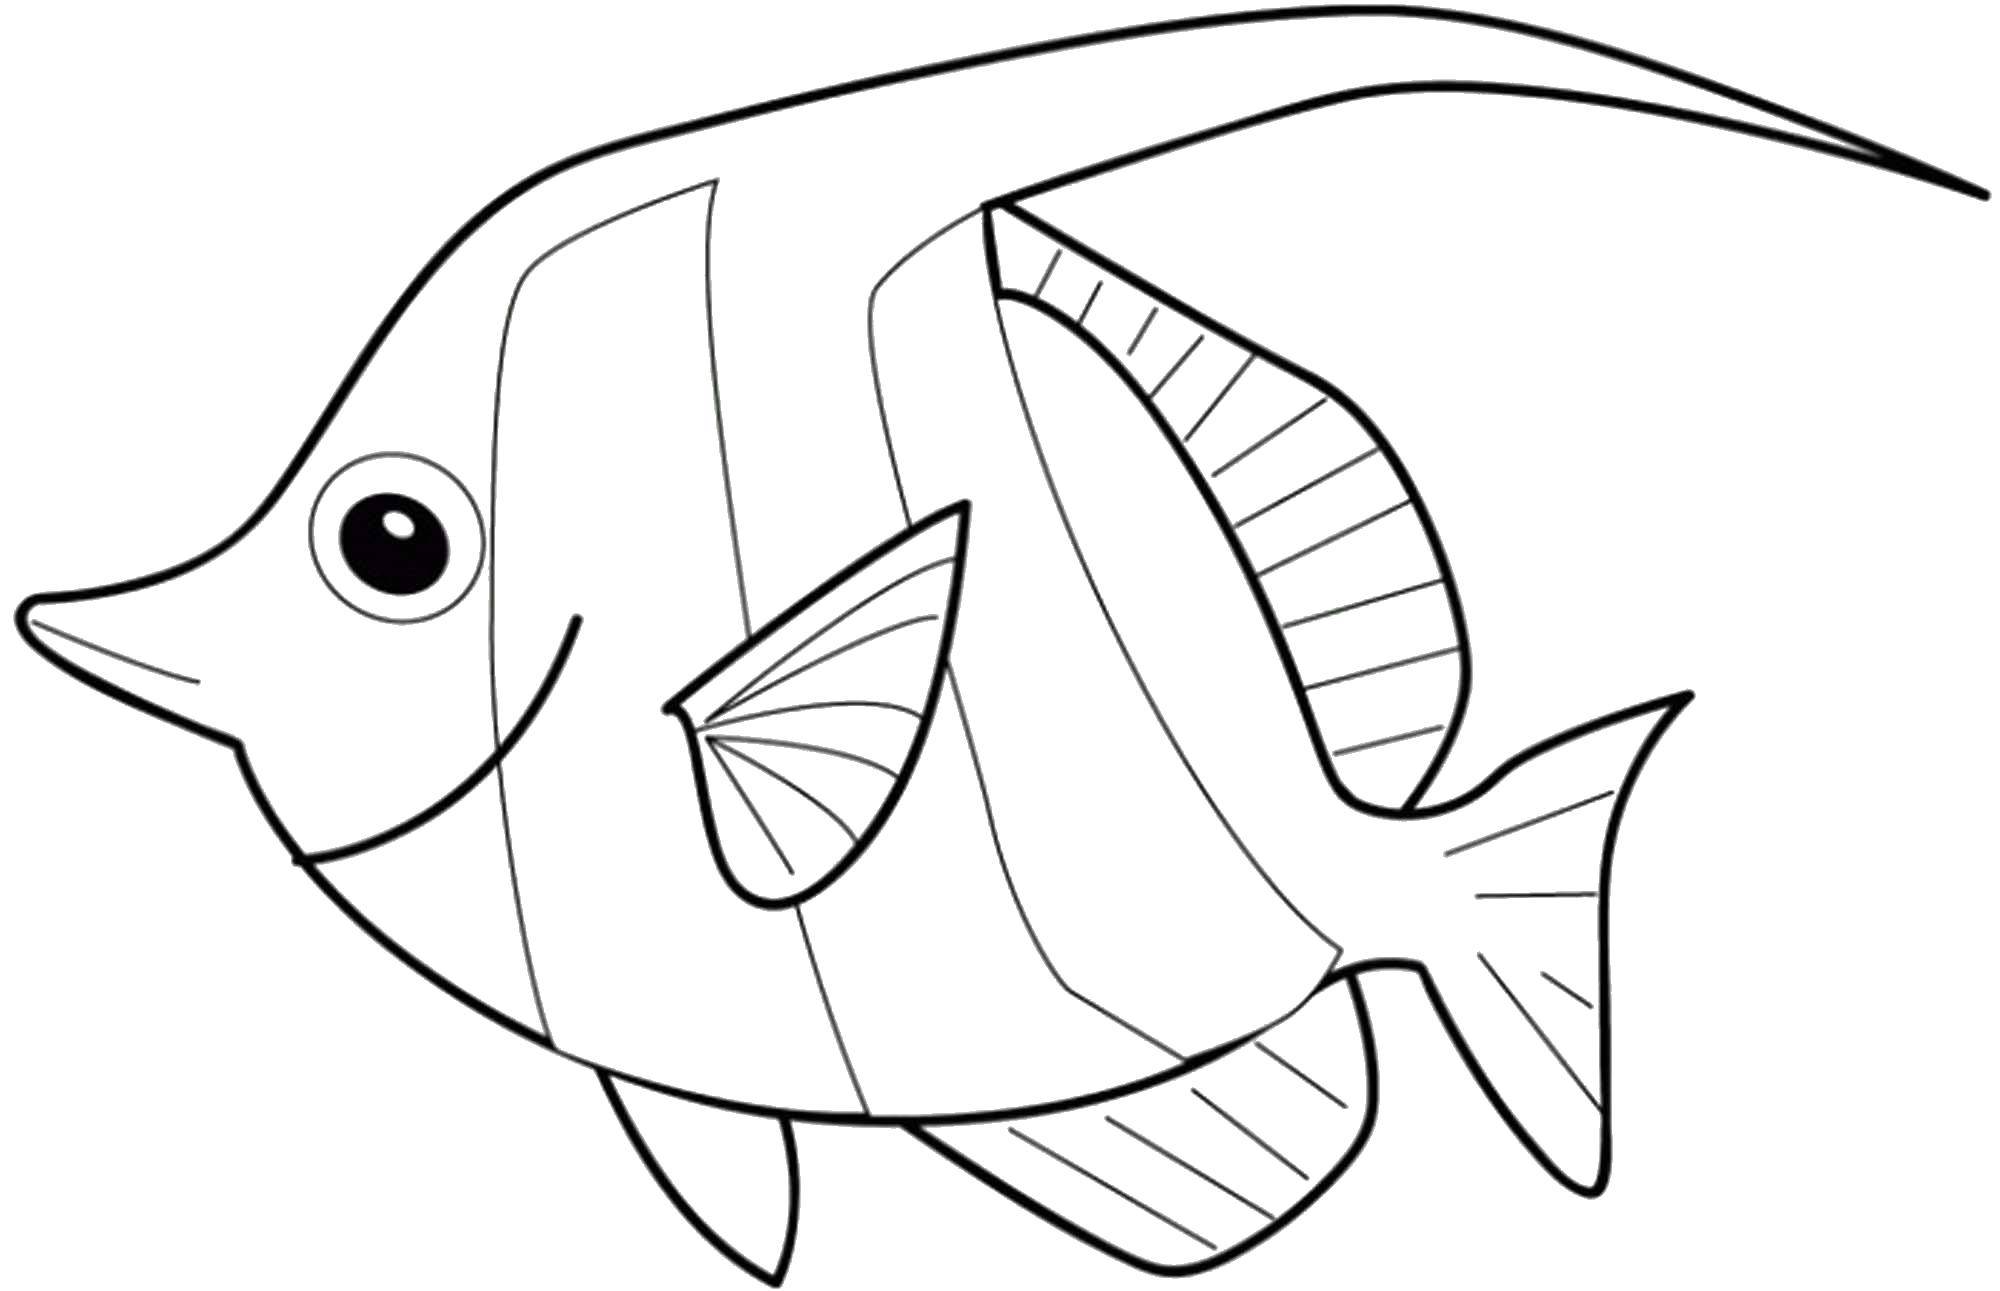 Coloring Fish. Category fish. Tags:  Underwater world, fish.